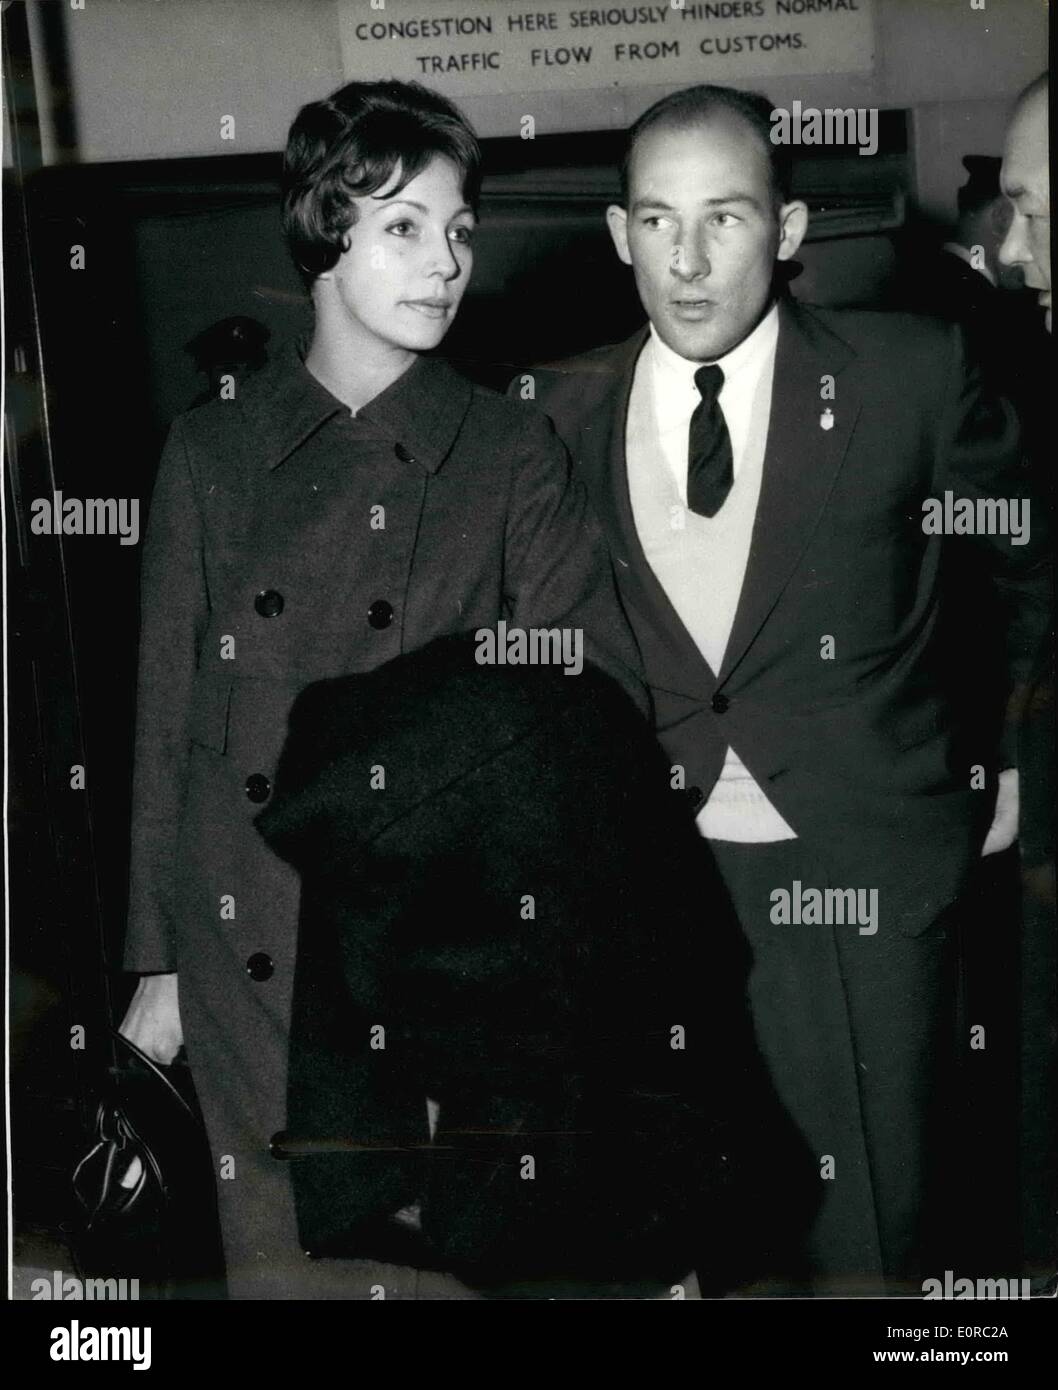 Jan. 01, 1959 - Stirling Moss and his wife arrive home. Photo shows Motor racer Stirling Moss and his wife on their arrival at London Airport last night from a holiday in Bangkok after he had won the Grand Prix races in Australia and New Zealand. Stirling said he was 'staggerd' by the death of his friend and fellow racing driver Mike Hawthorn. Stock Photo